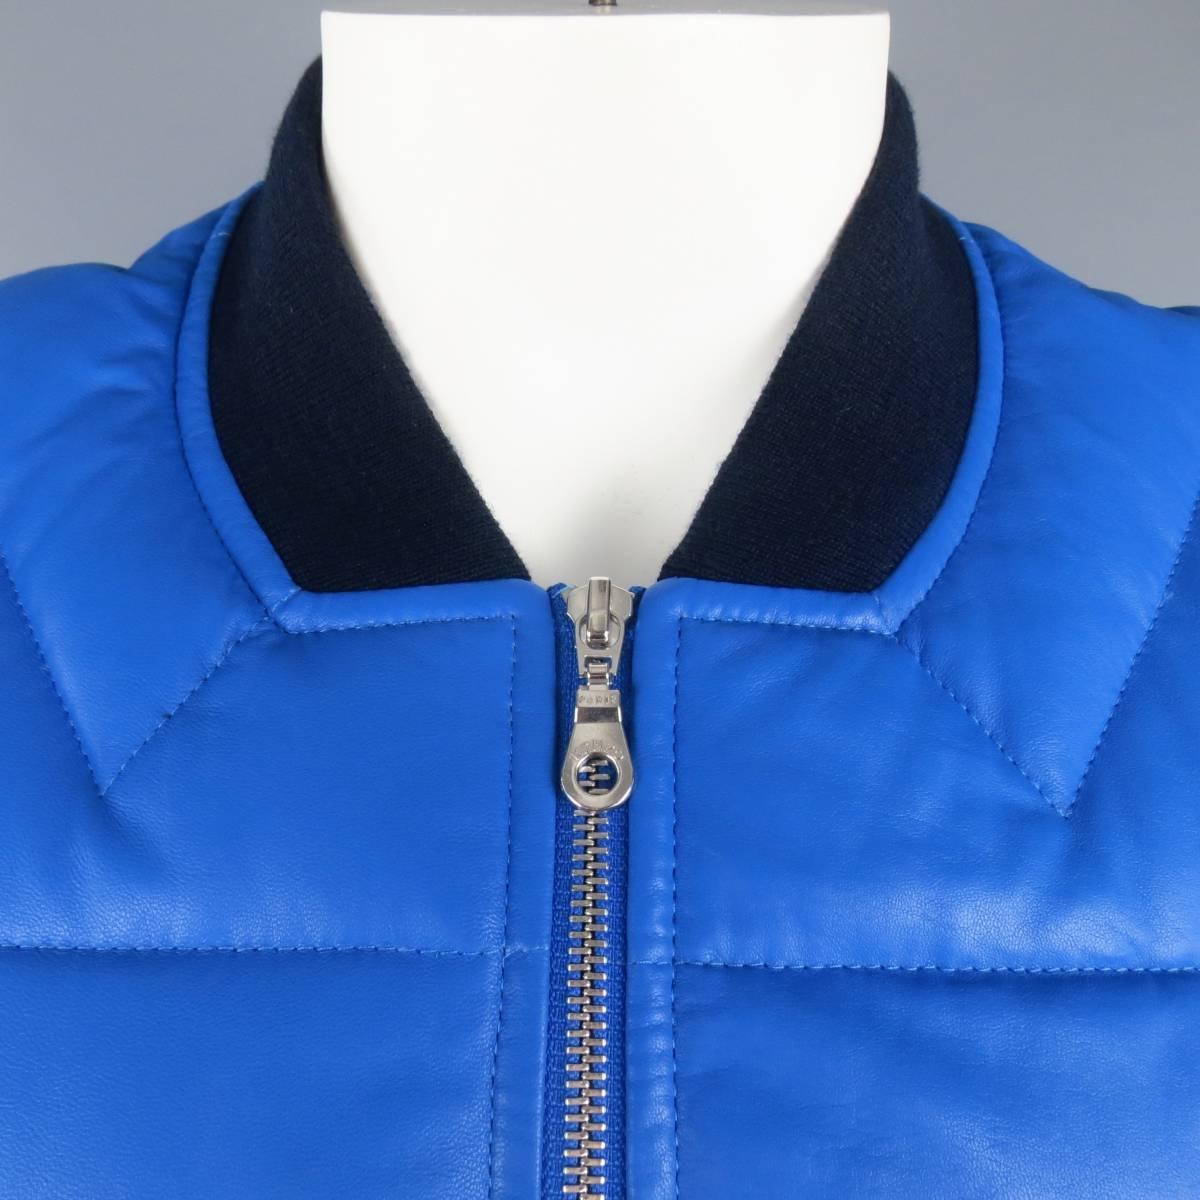 KENZO bomber style jacket in a vibrant blue chevron quilted lambskin leather featuring slanted snap pockets, ribbed sides, and navy knit collar and cuffs. Minor imperfections in leather. As-Is. Made in  Romania.
 
New with Tags. Retails at